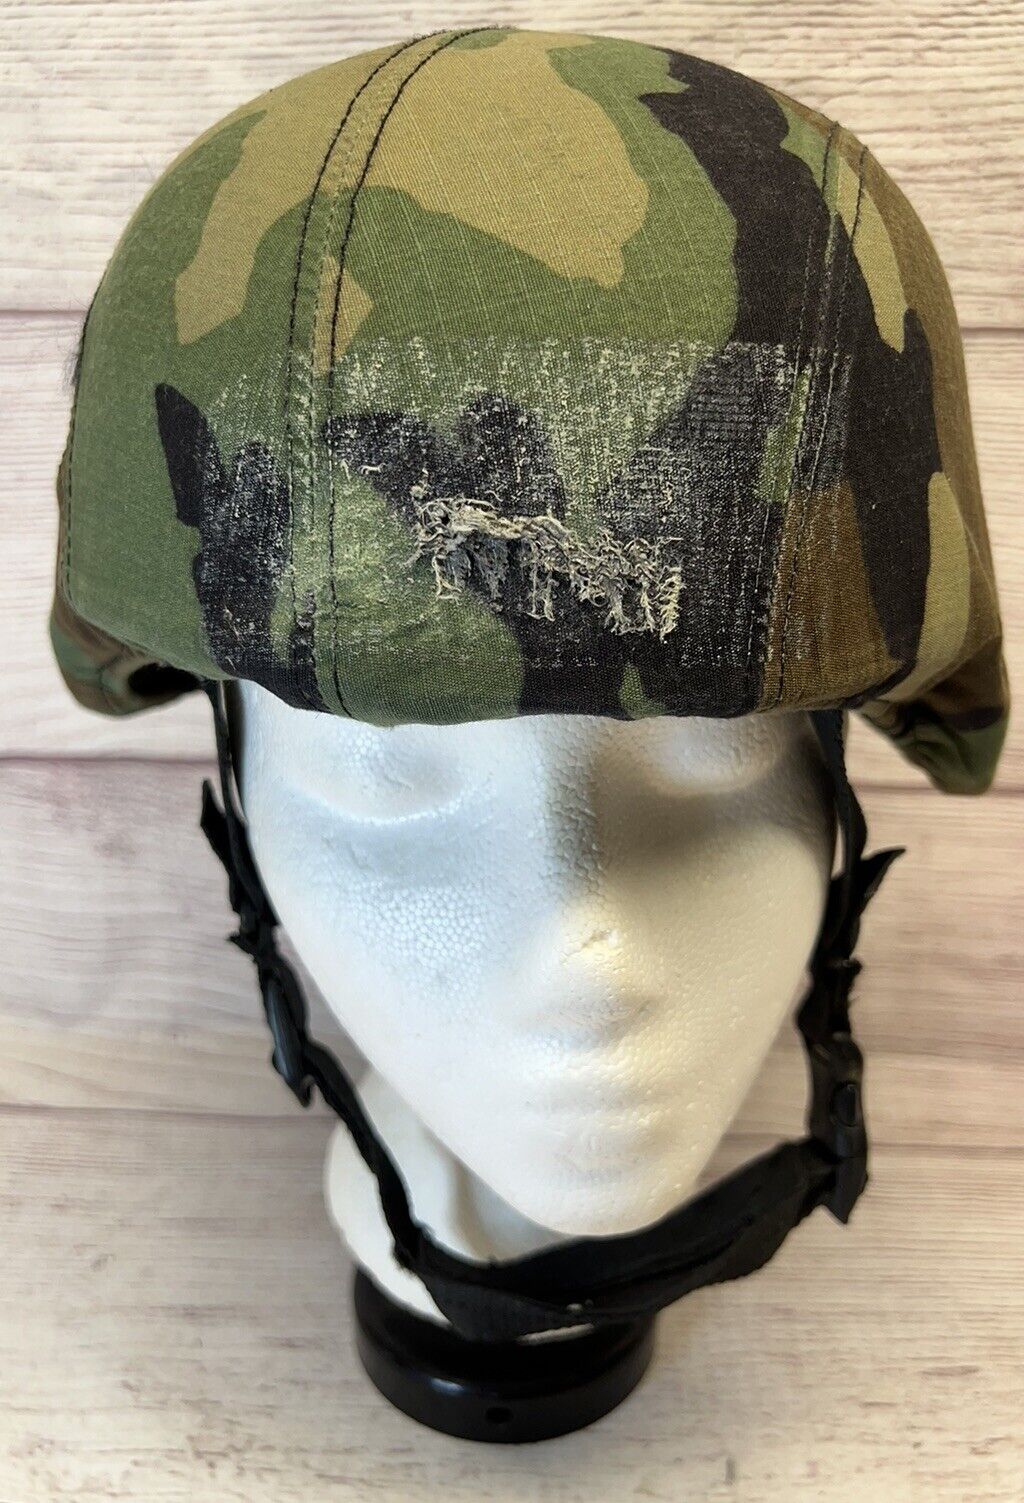 US Army Military PASGT Made with Kevlar Ballistic Helmet Small w/ Woodland COVER